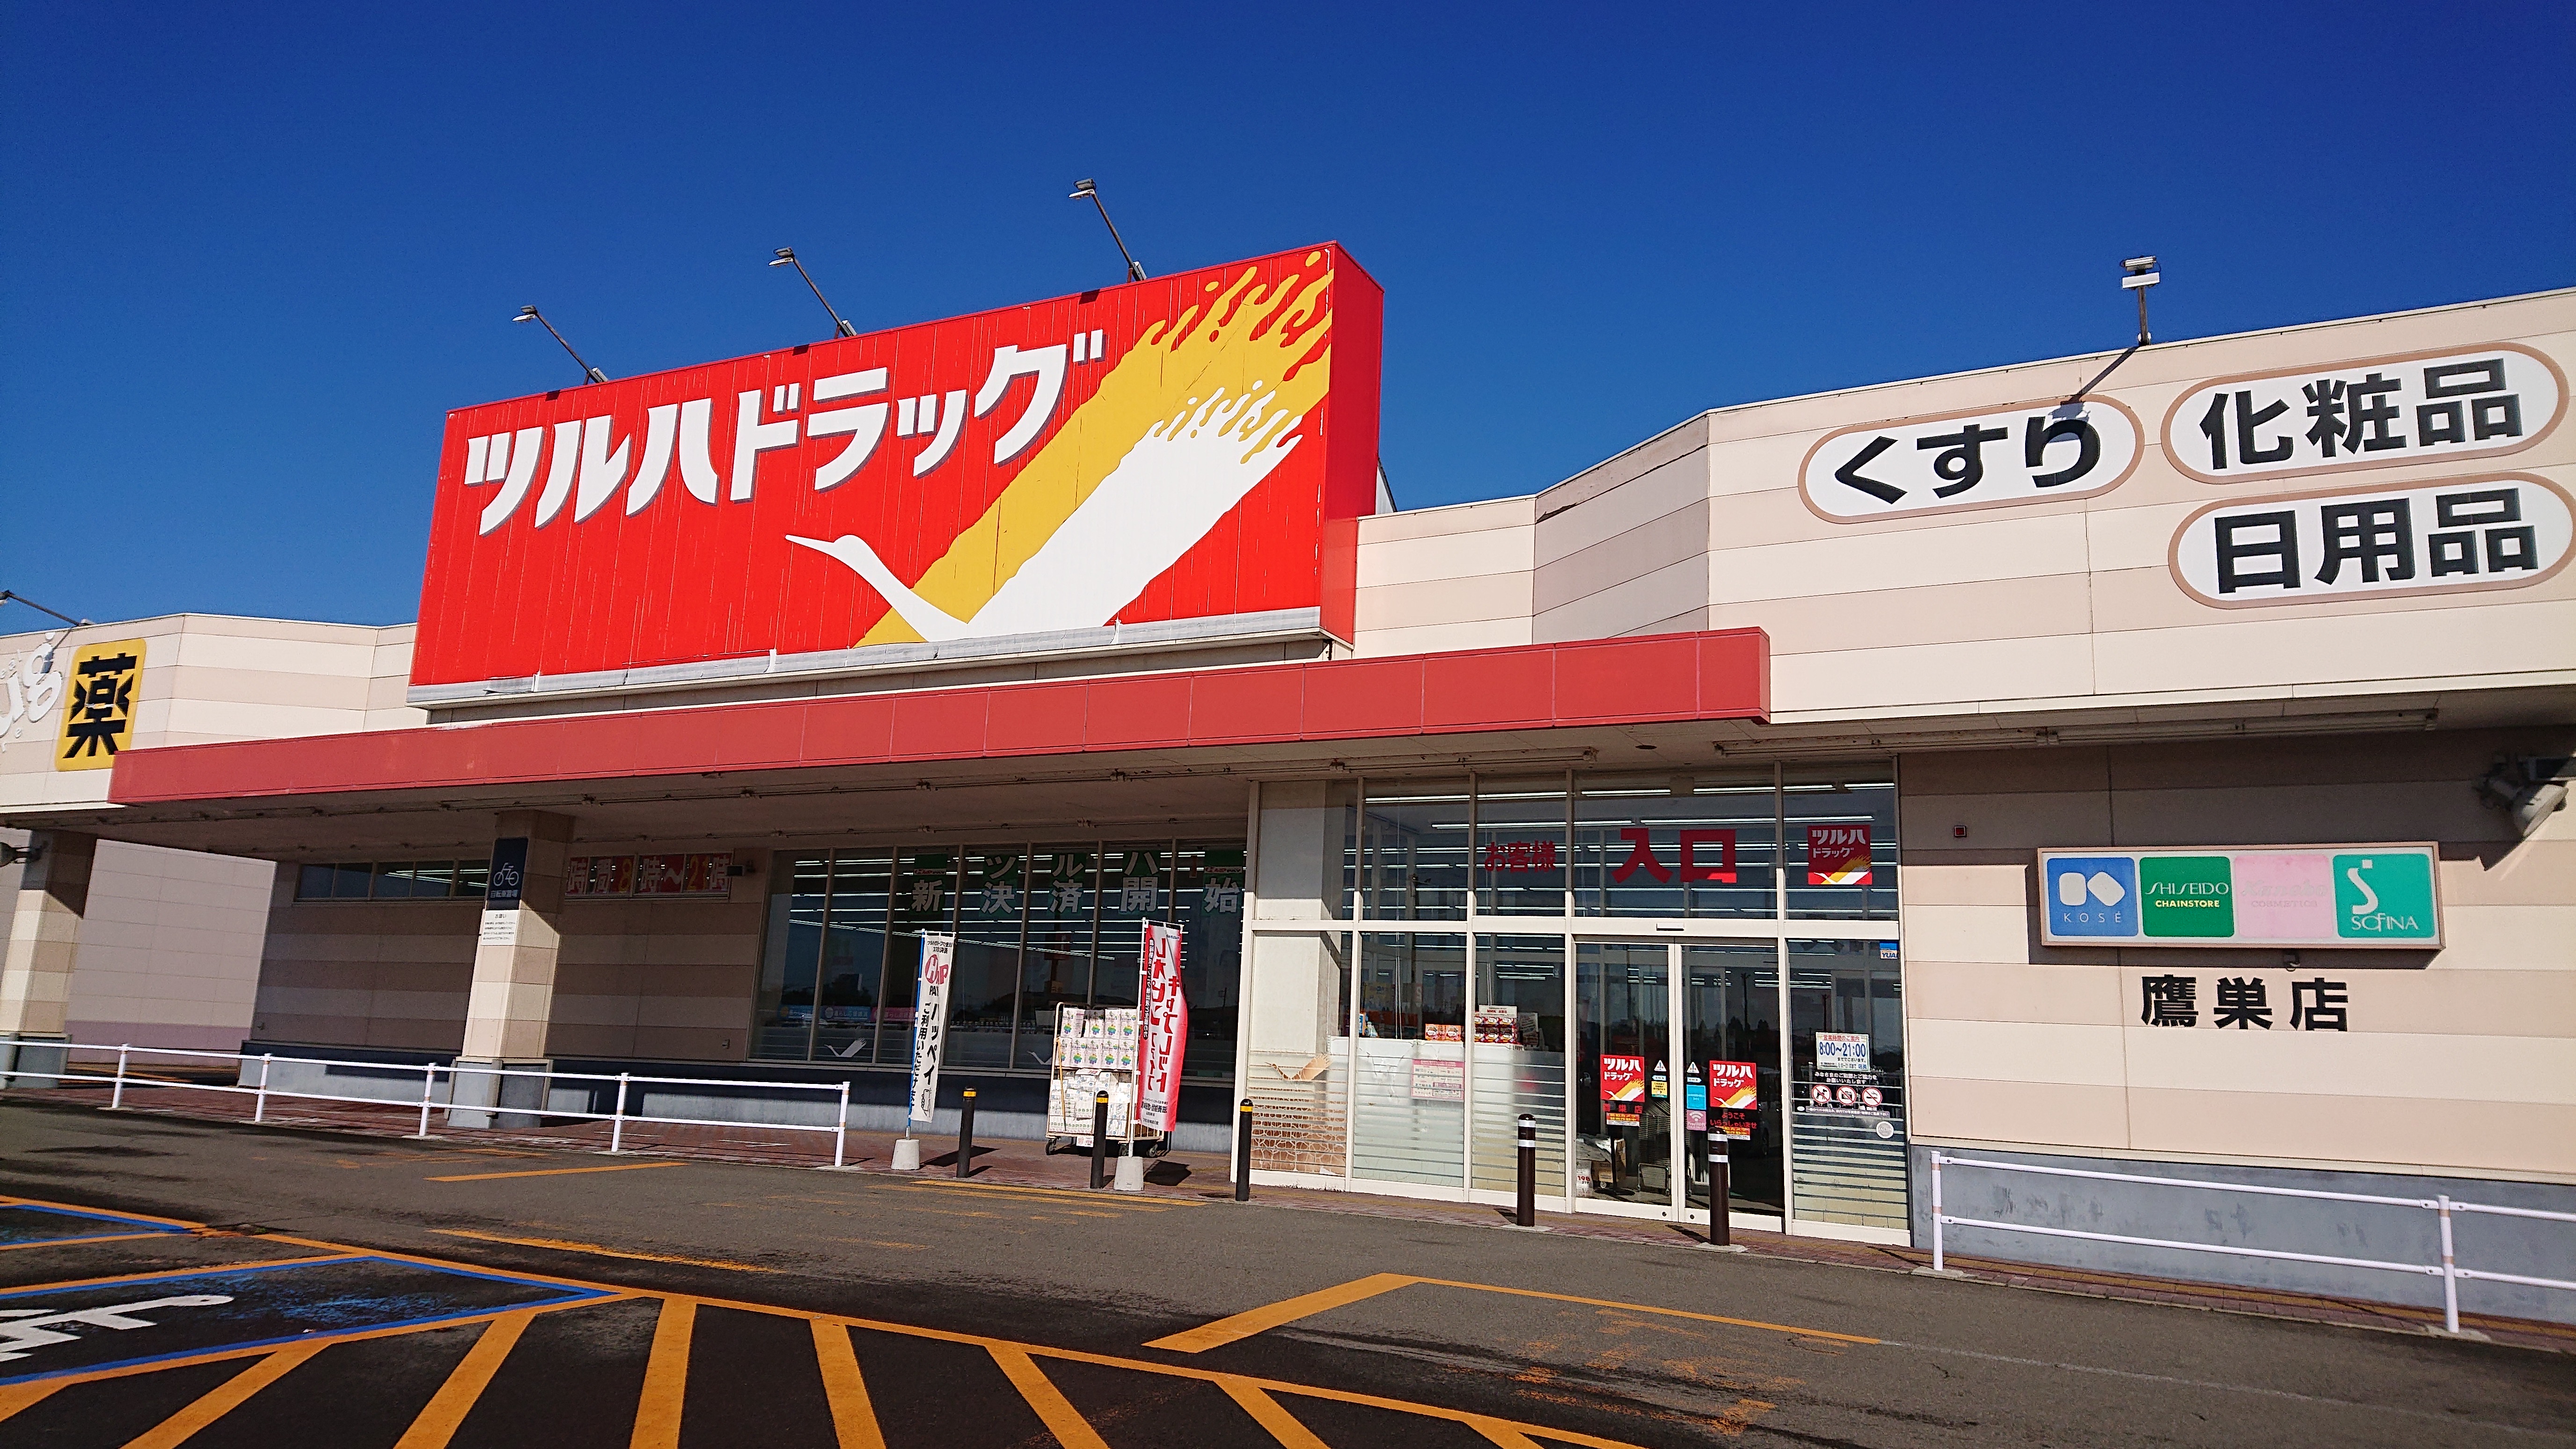 Images ツルハドラッグ 鷹巣店 - 閉店